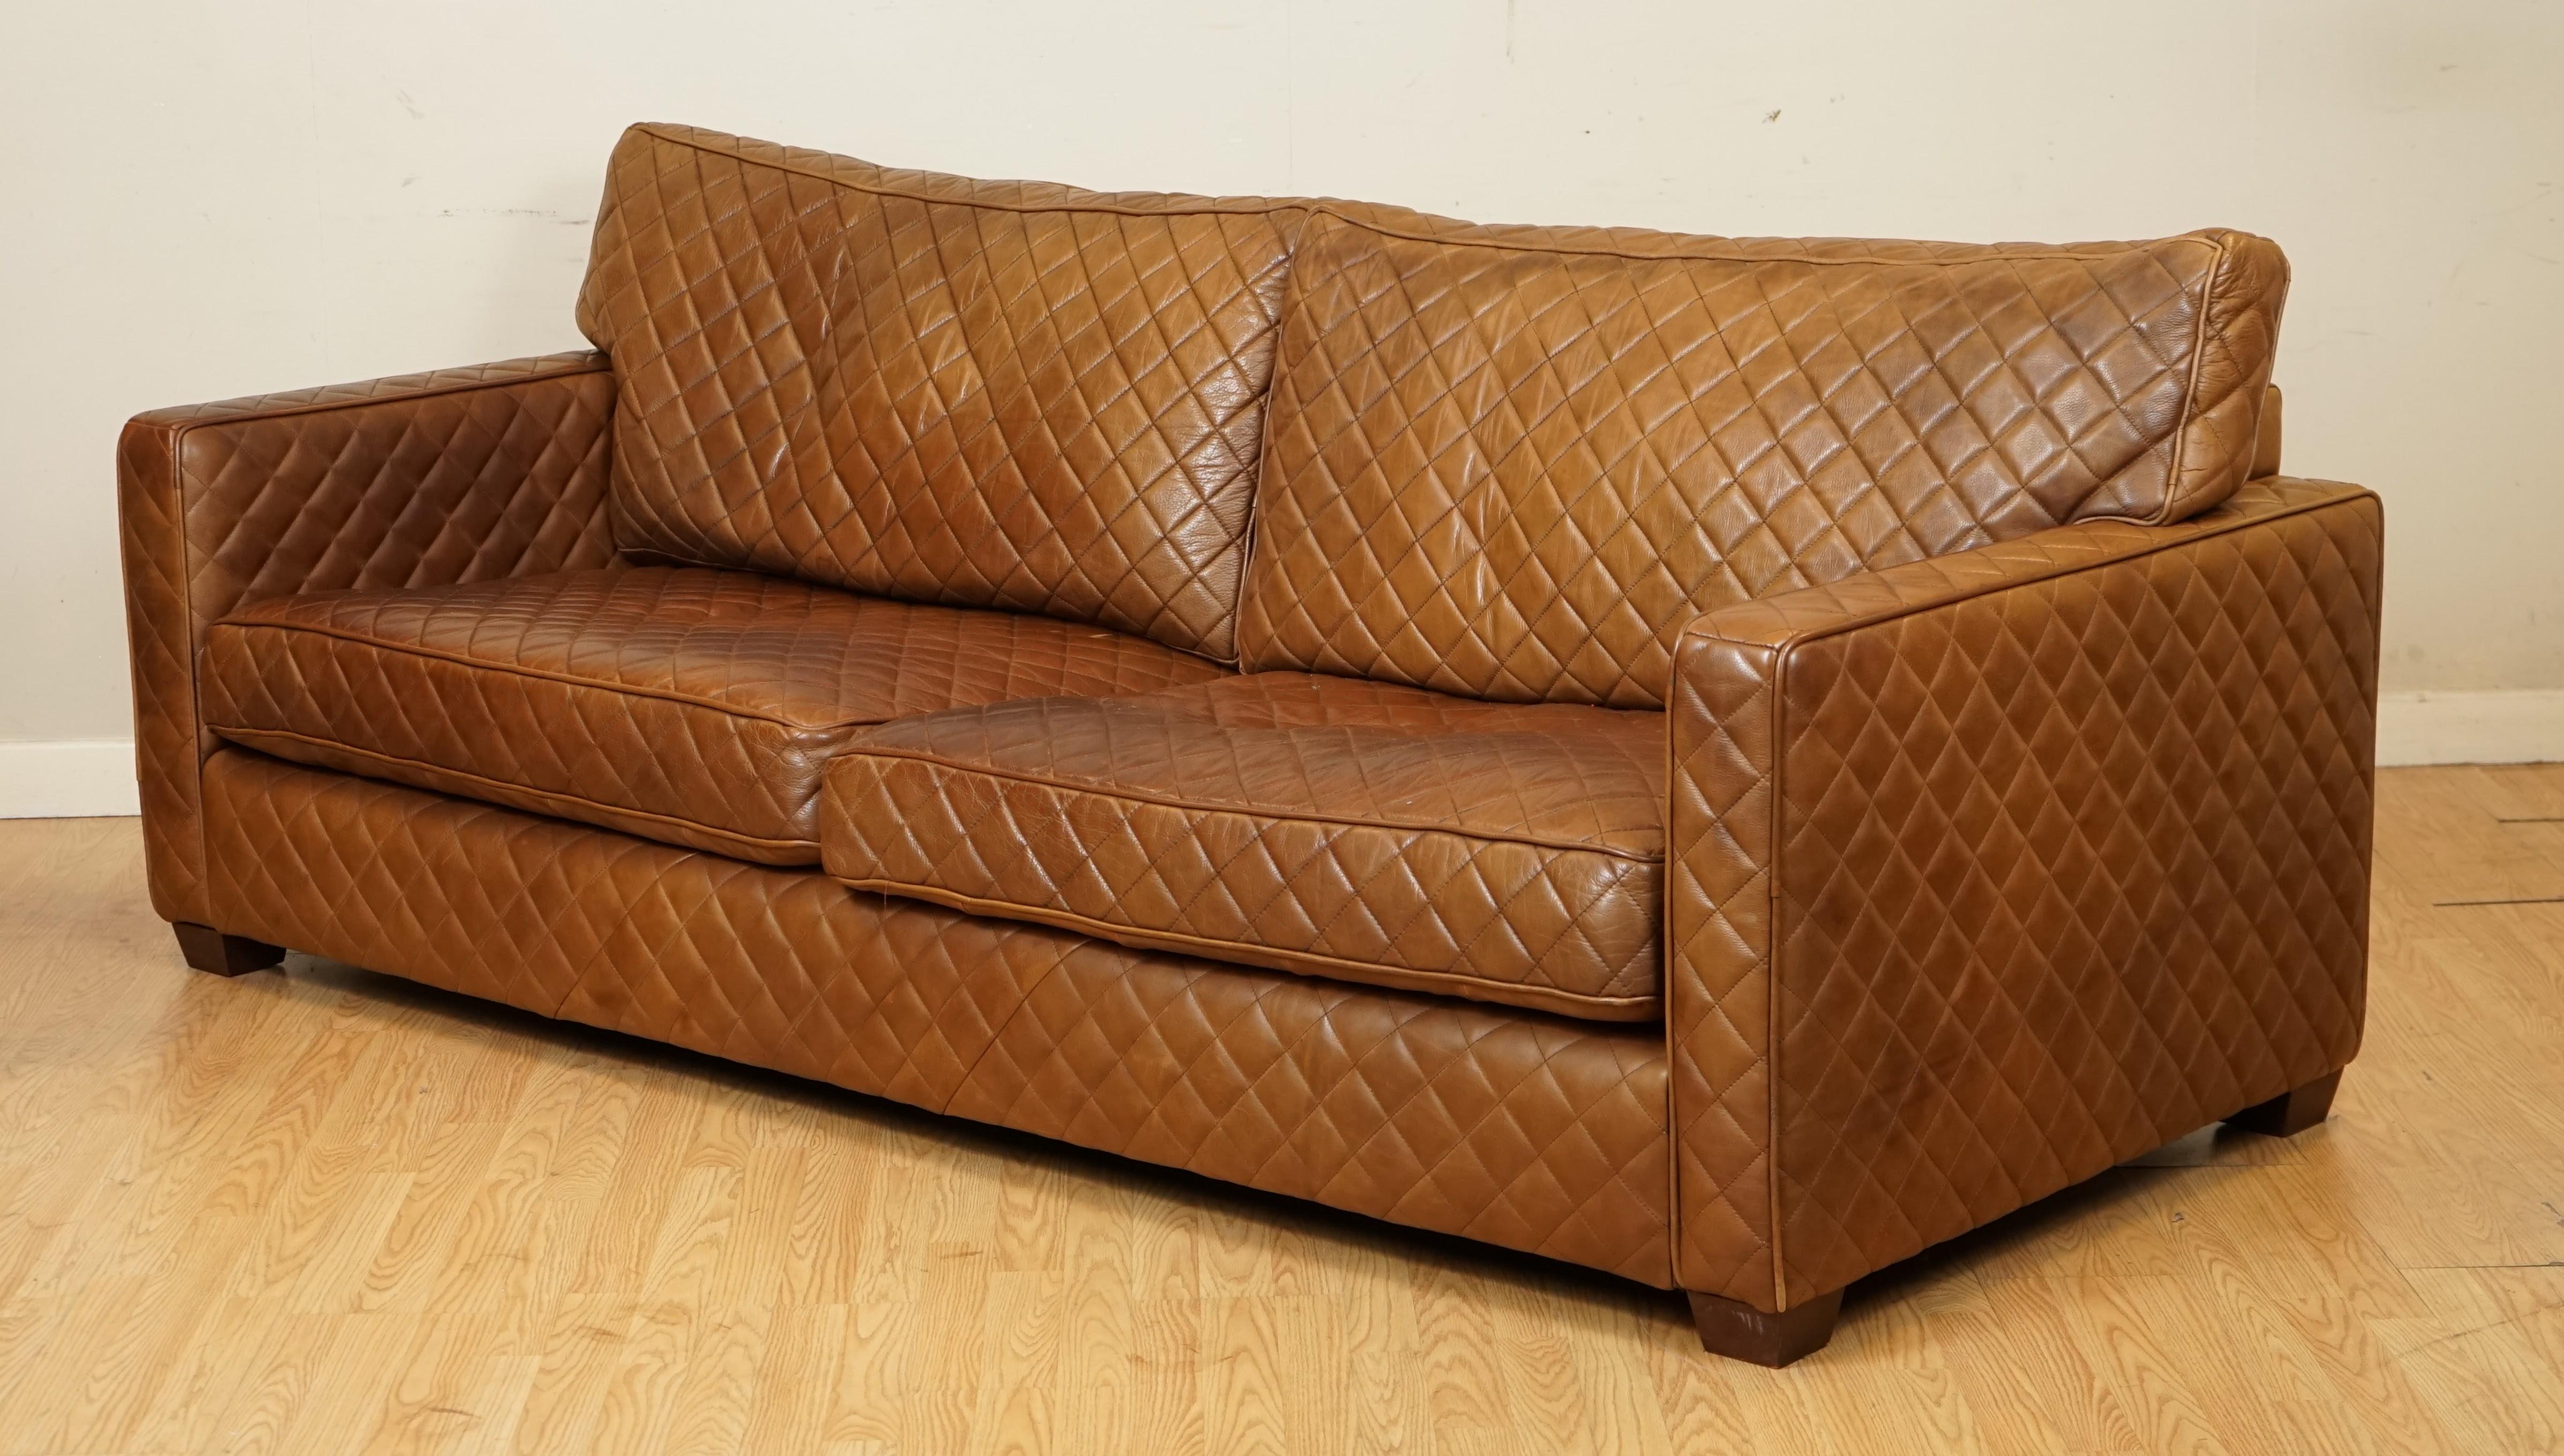 We are so excited to present to you this stunning Timothy Oulton sofa.
It can comfortably seat 3 people up to 4.

The diamond stitch design was only made to order, all the cushions are still nice and firm.

There will be some patina and general